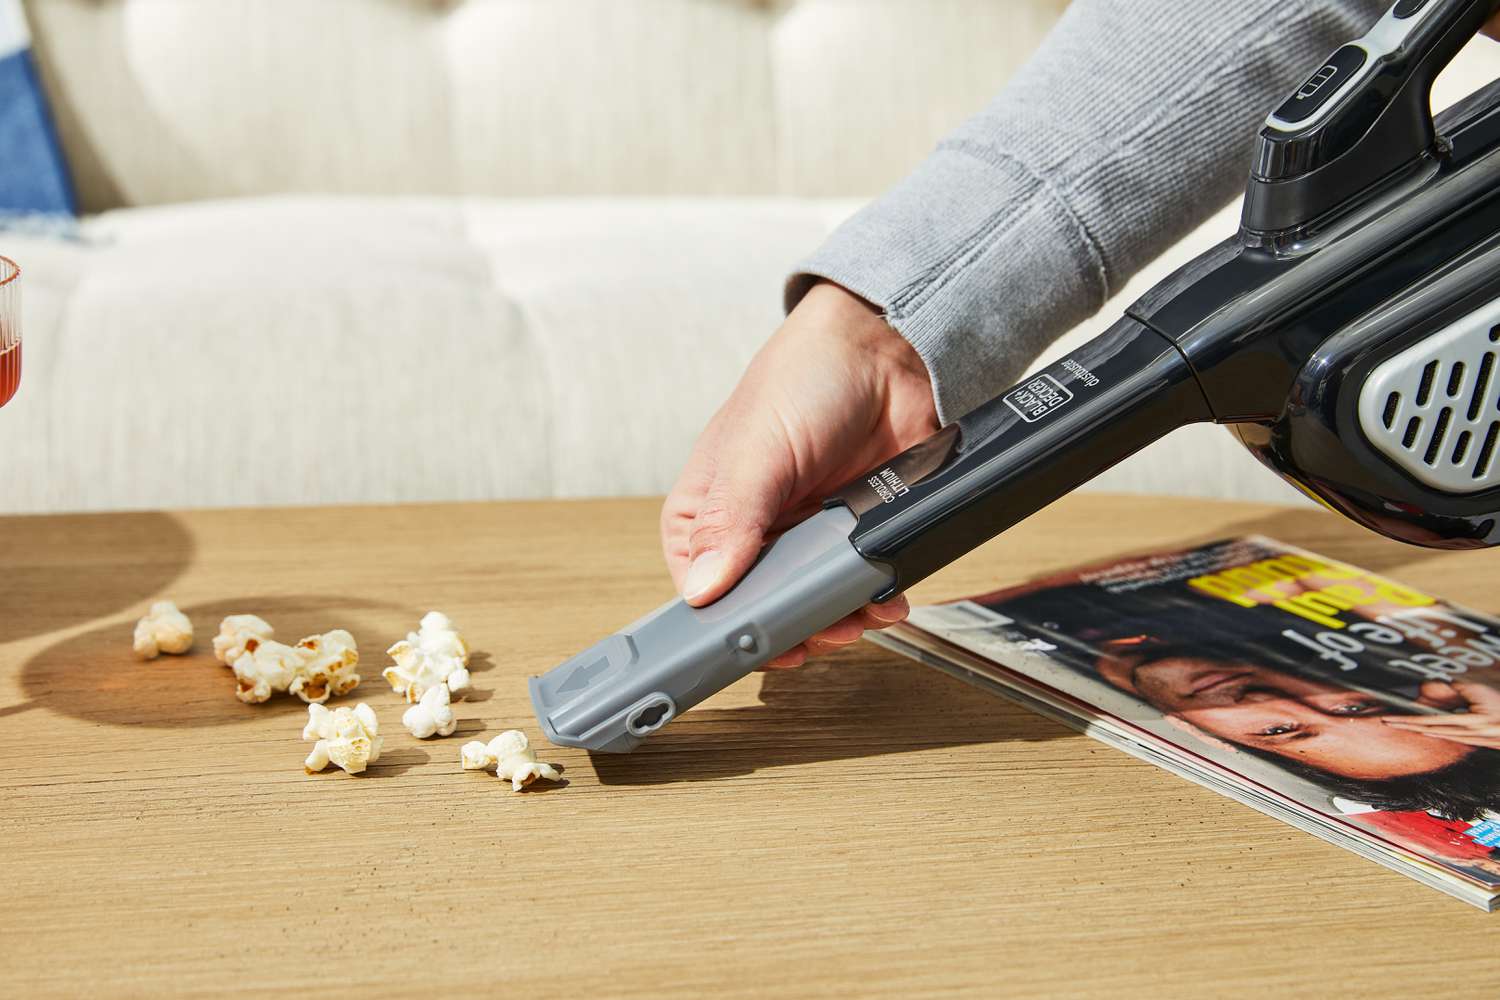 Person using Black+Decker Dustbuster AdvancedClean+ Cordless Hand Vacuum to clean popcorn from coffee table